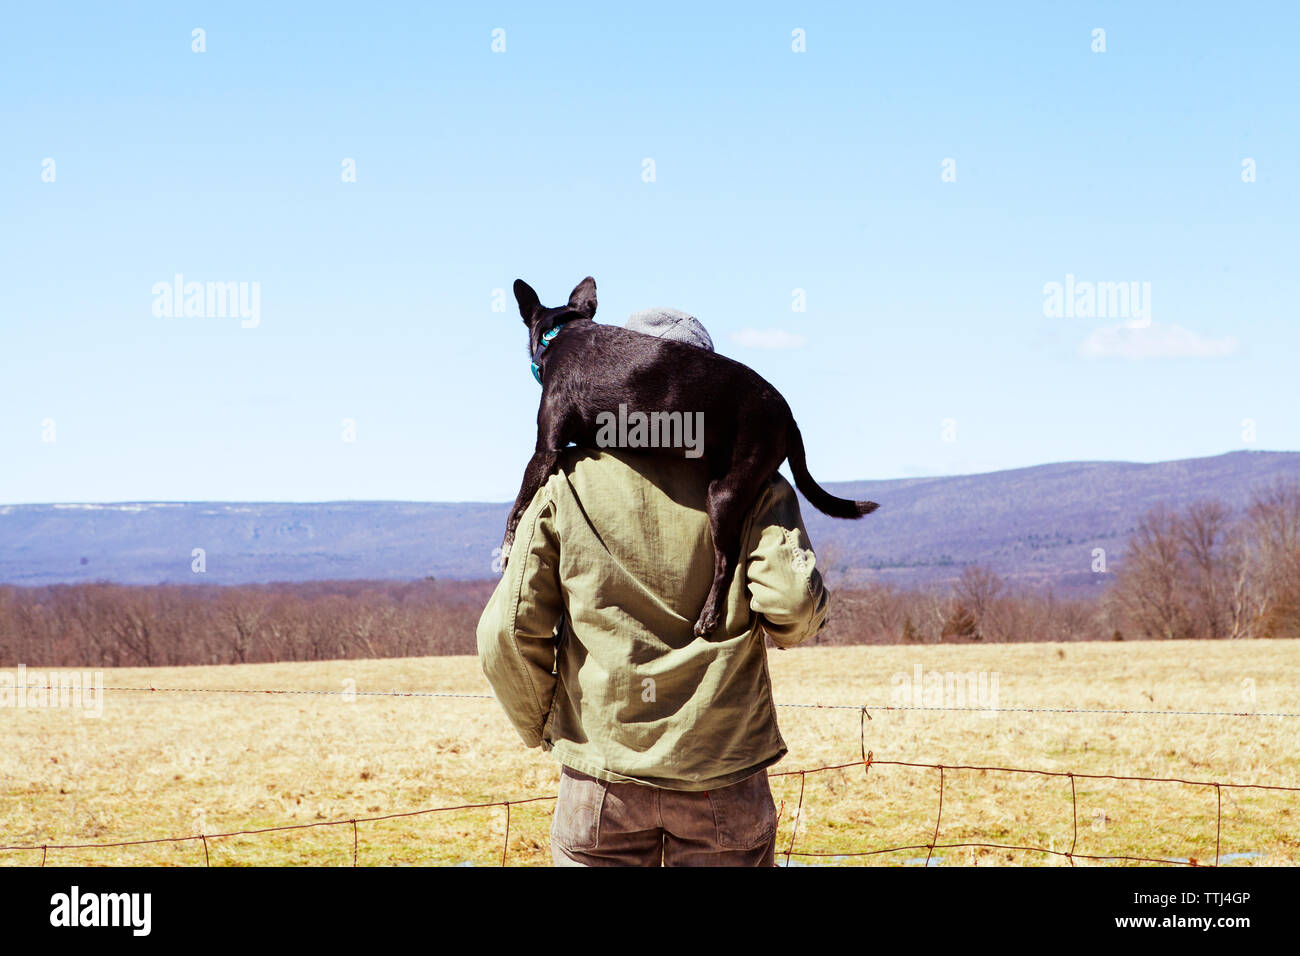 Rear view of man carrying dog on shoulders while standing at field against blue sky Stock Photo